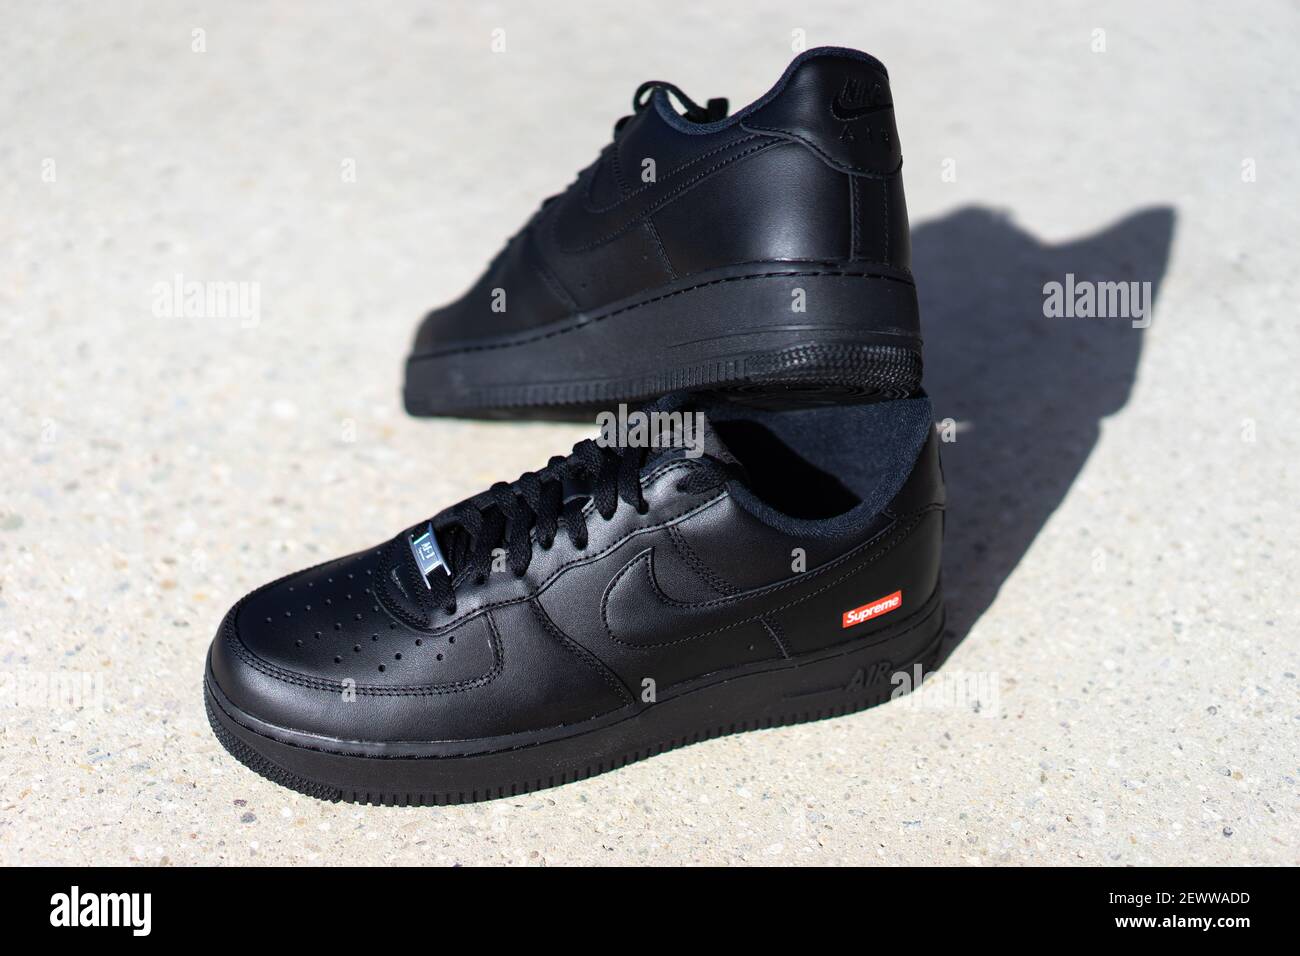 all black air force 1 low